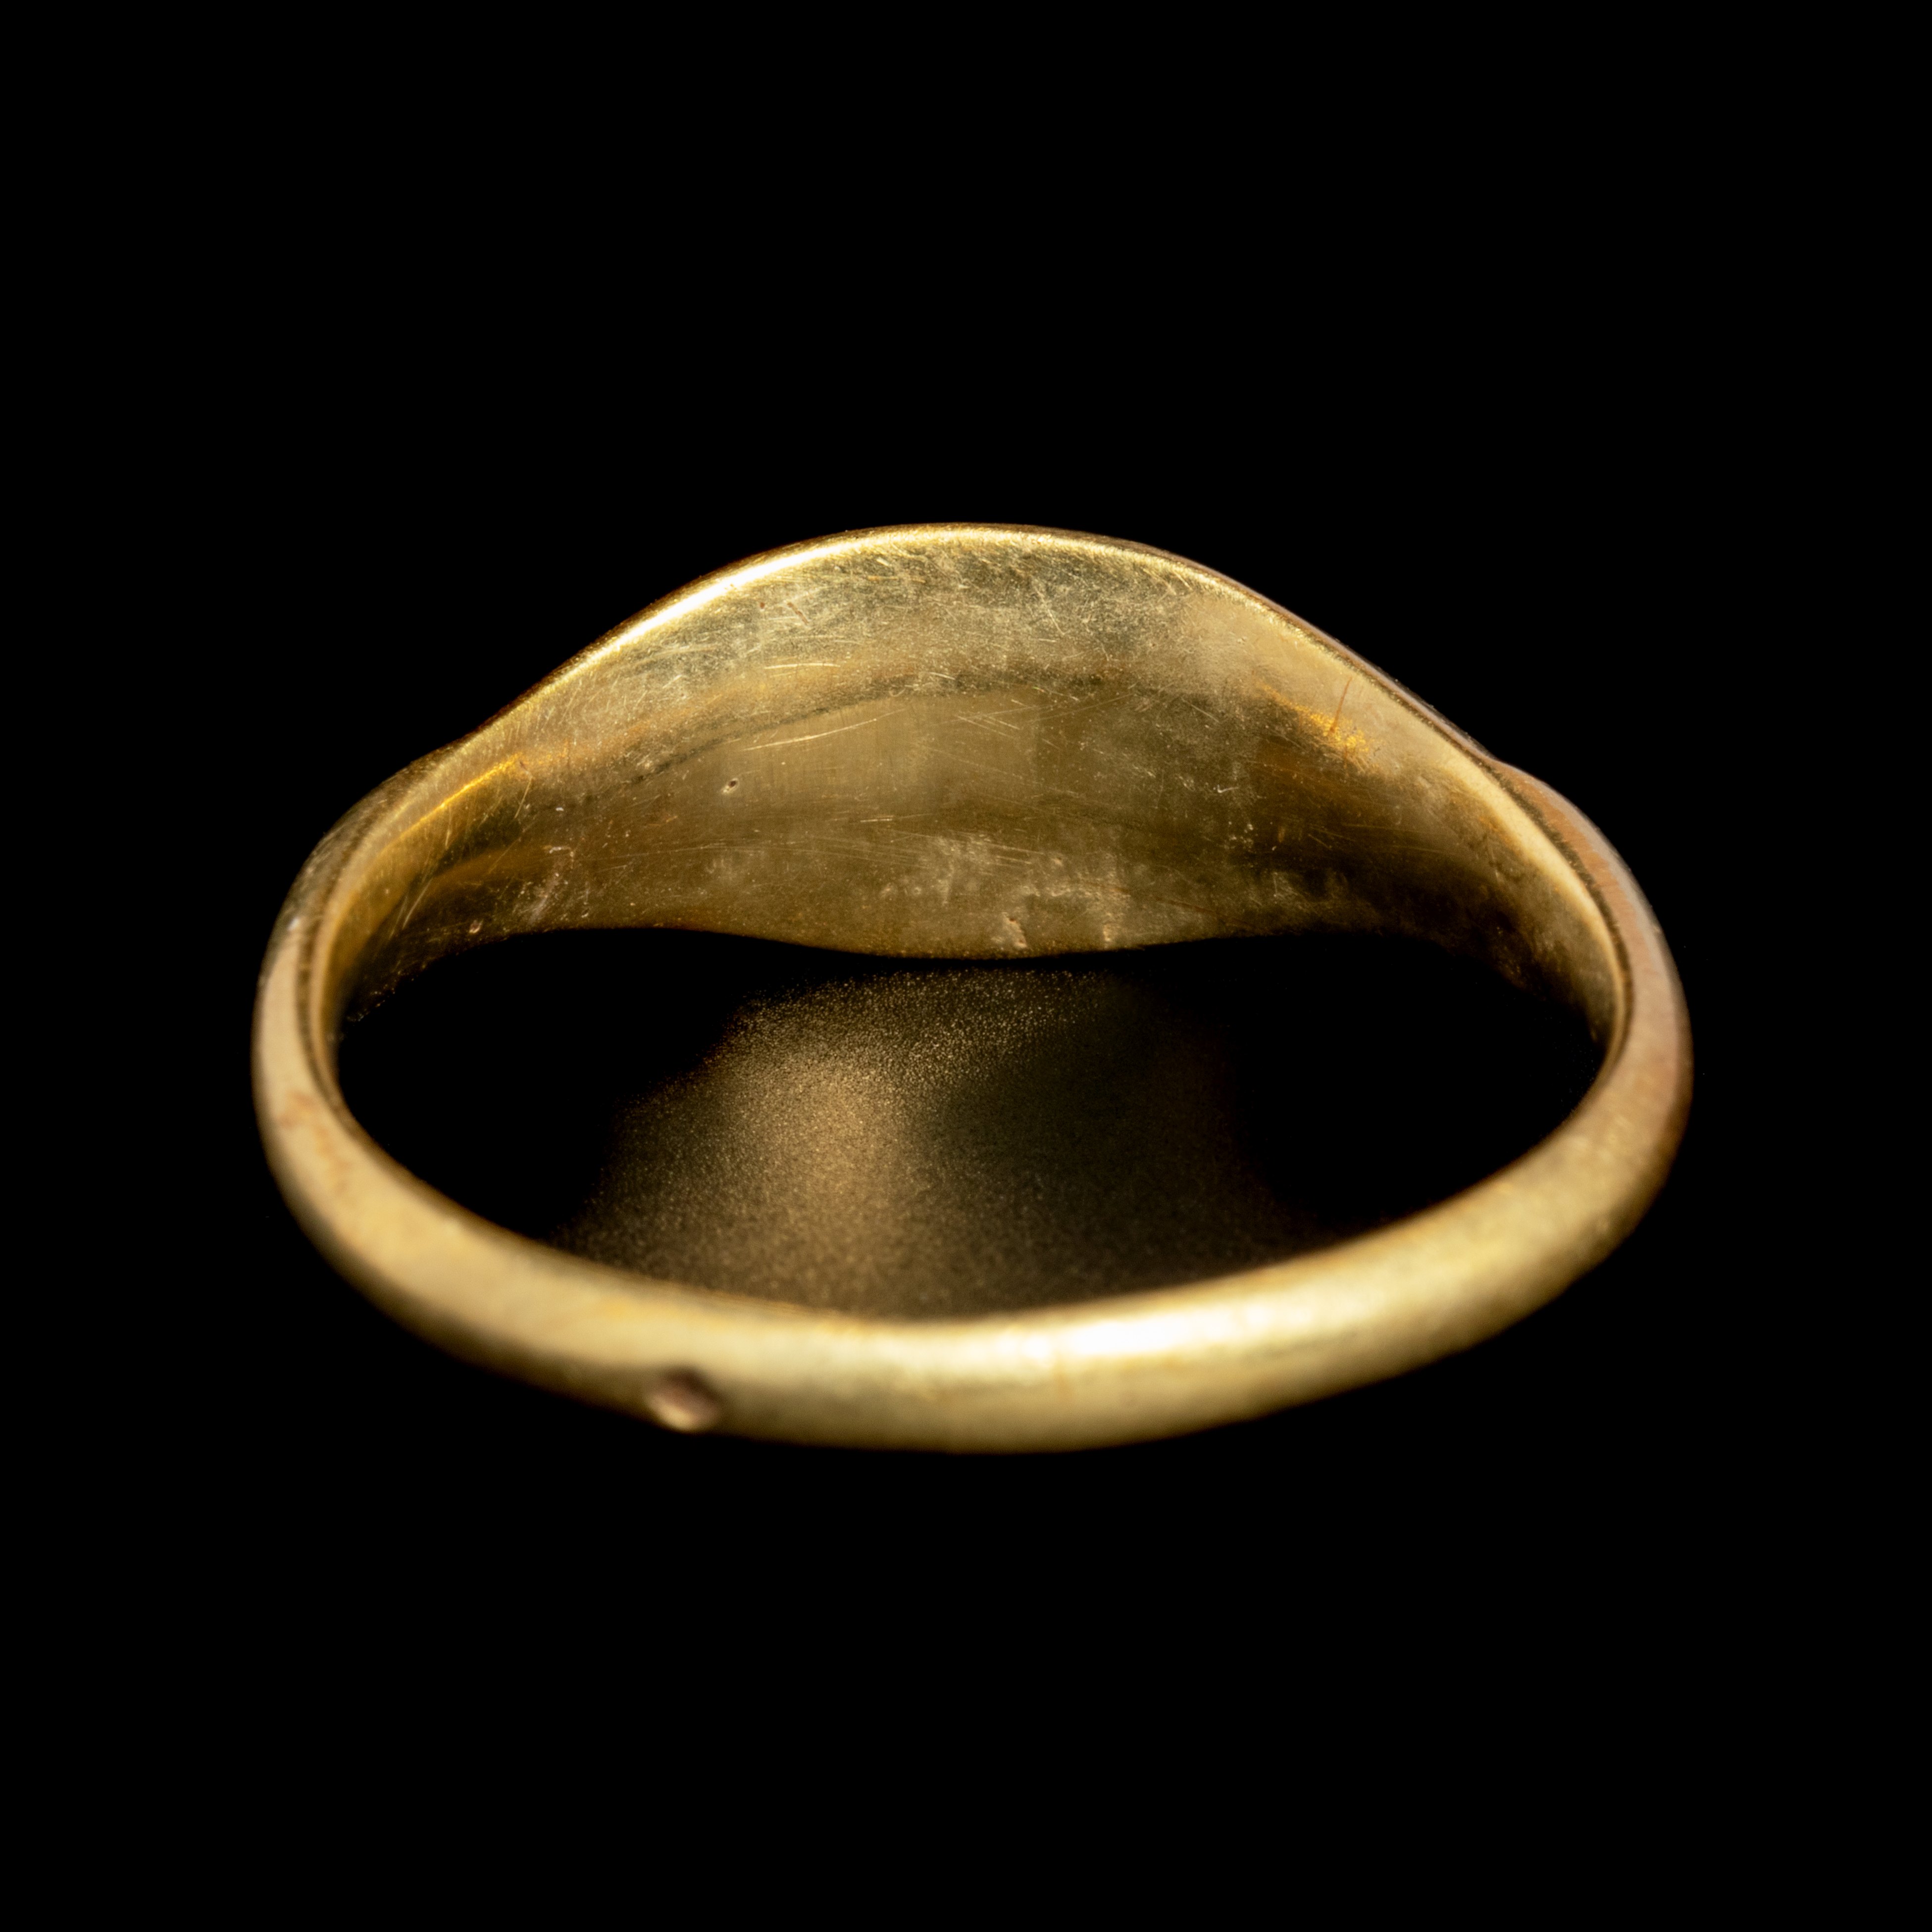 A Roman Gold Finger Ring Ring size 7 3/4; Diameter 3/4 inch (2 cm). - Image 4 of 4